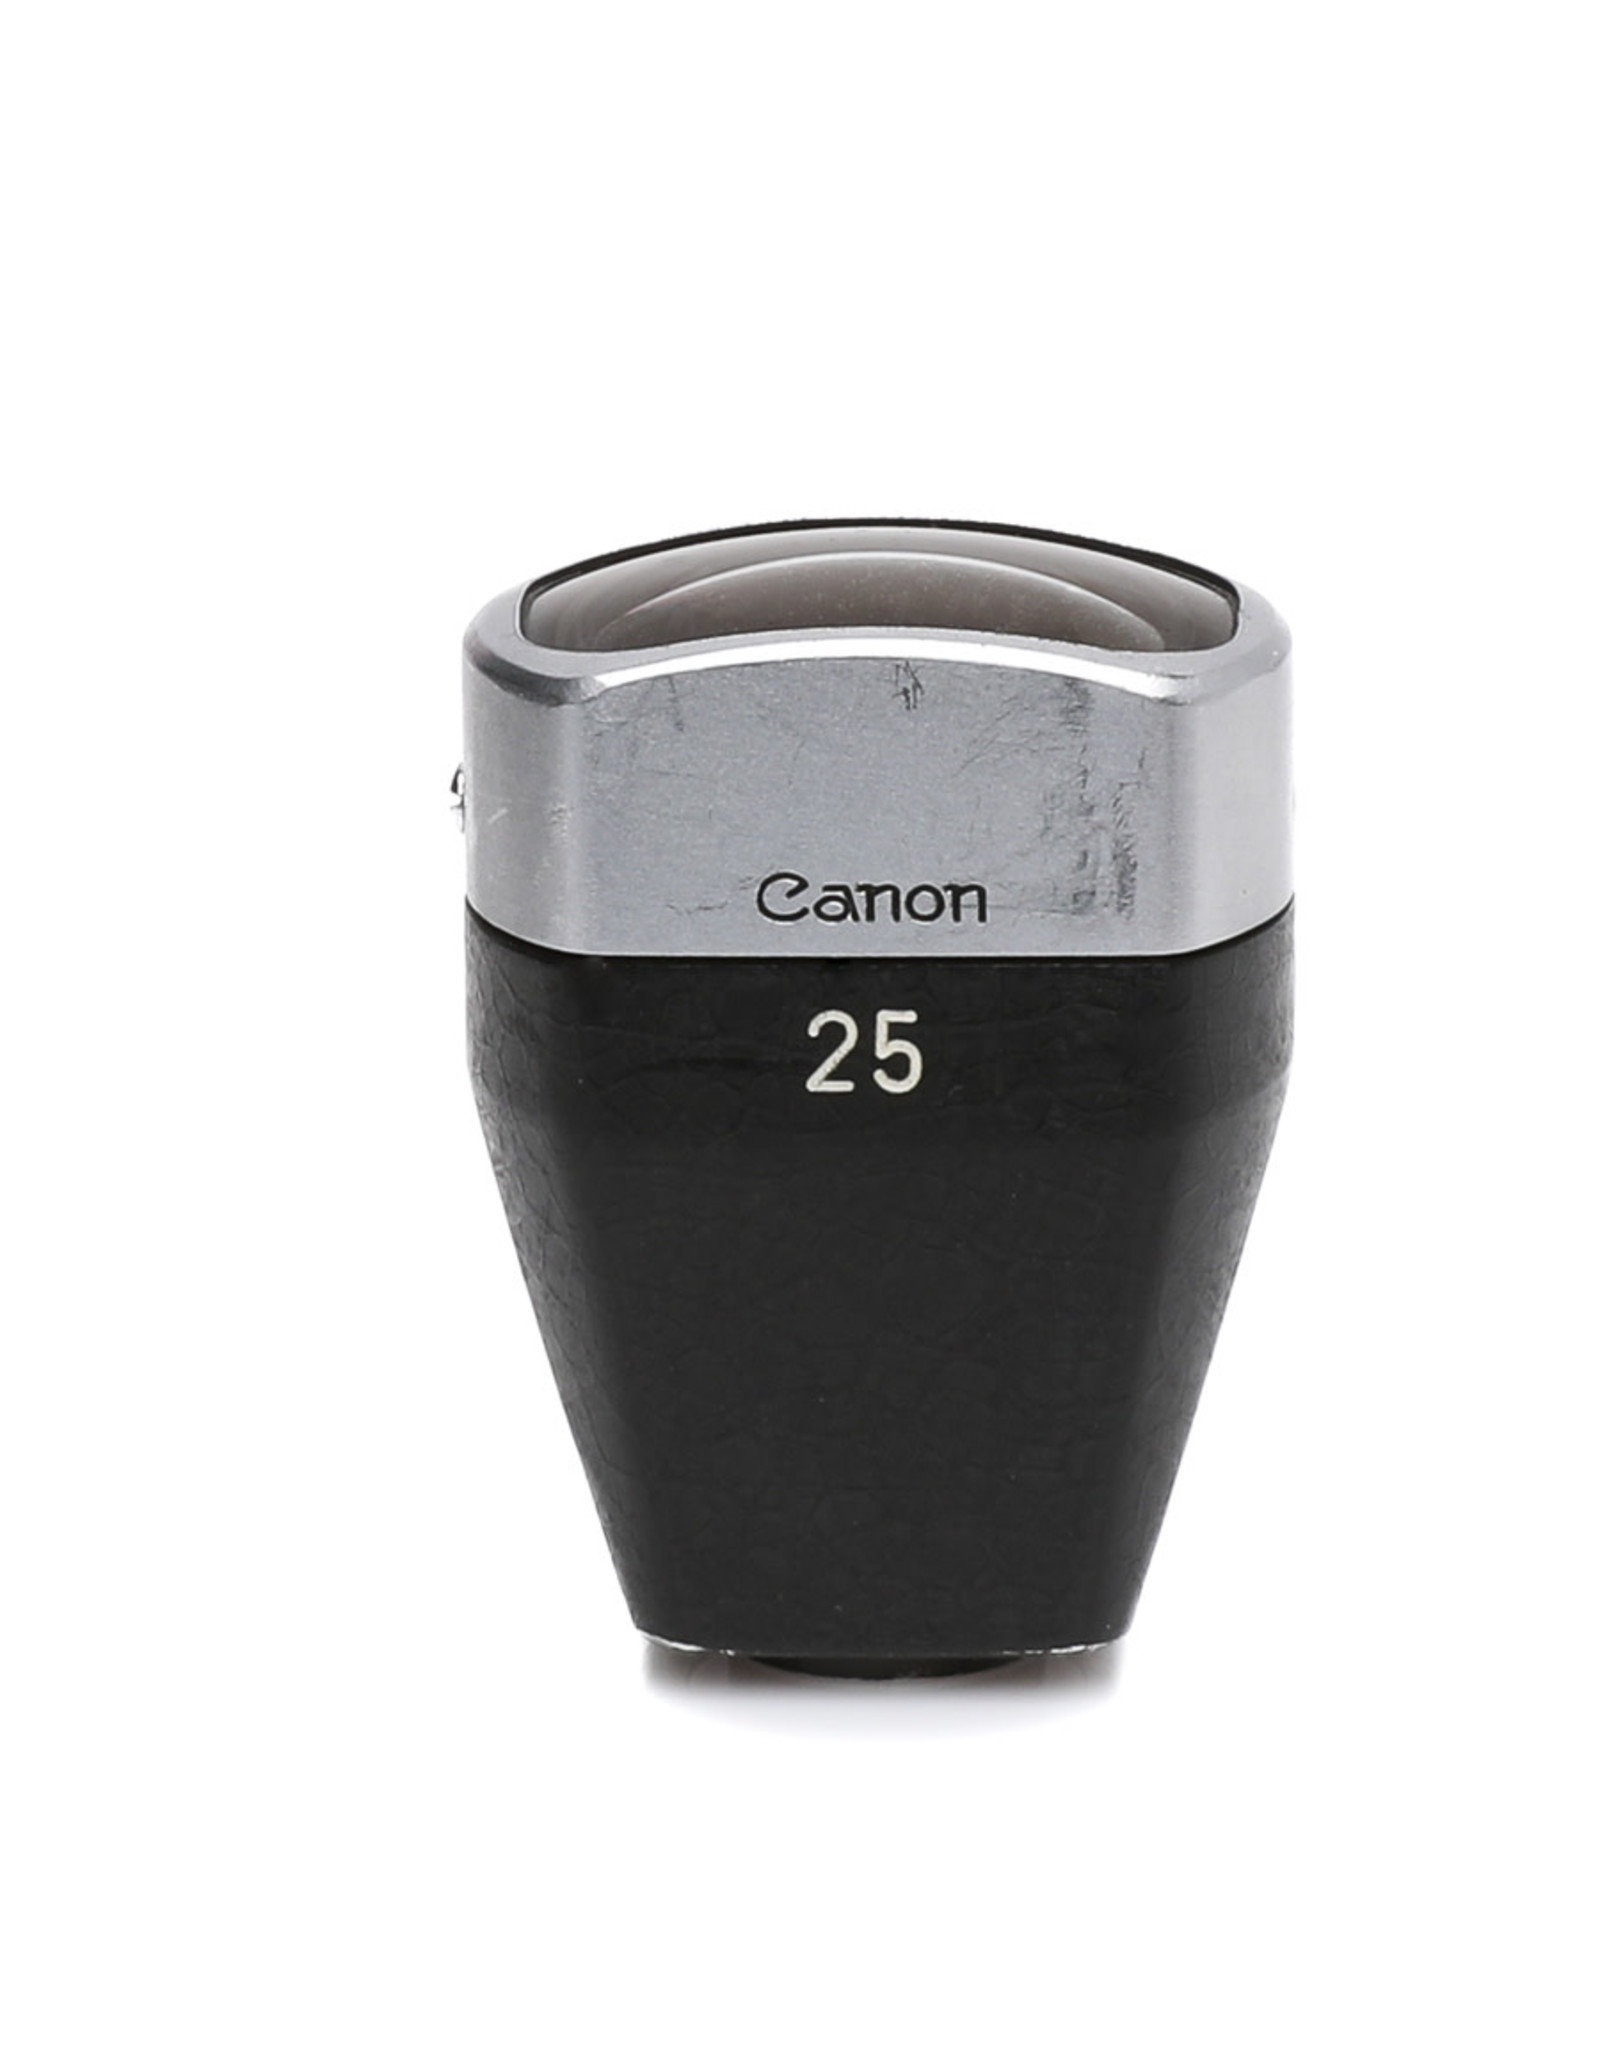 Canon Canon Serenar 25mm f3.5 w/Viewfinder for LTM/M39/L39